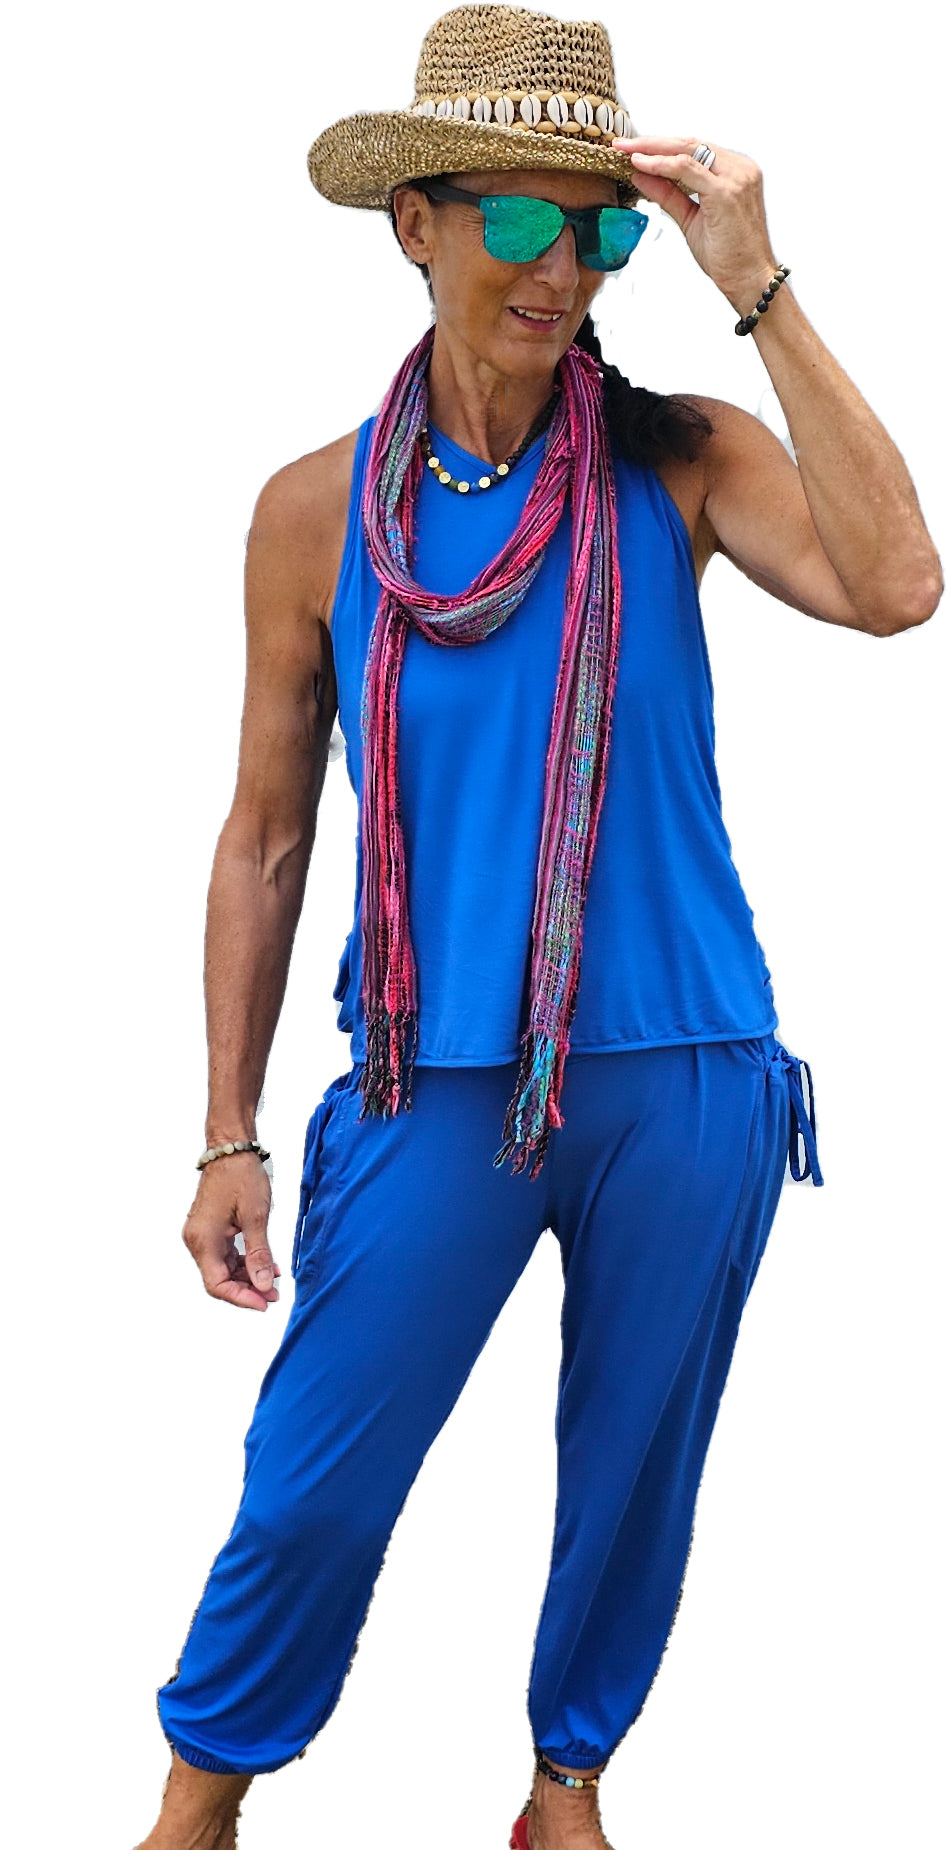 YOGAZ NEW Royal Blue Bamboo Pants with our Signature Pocket in Pocke